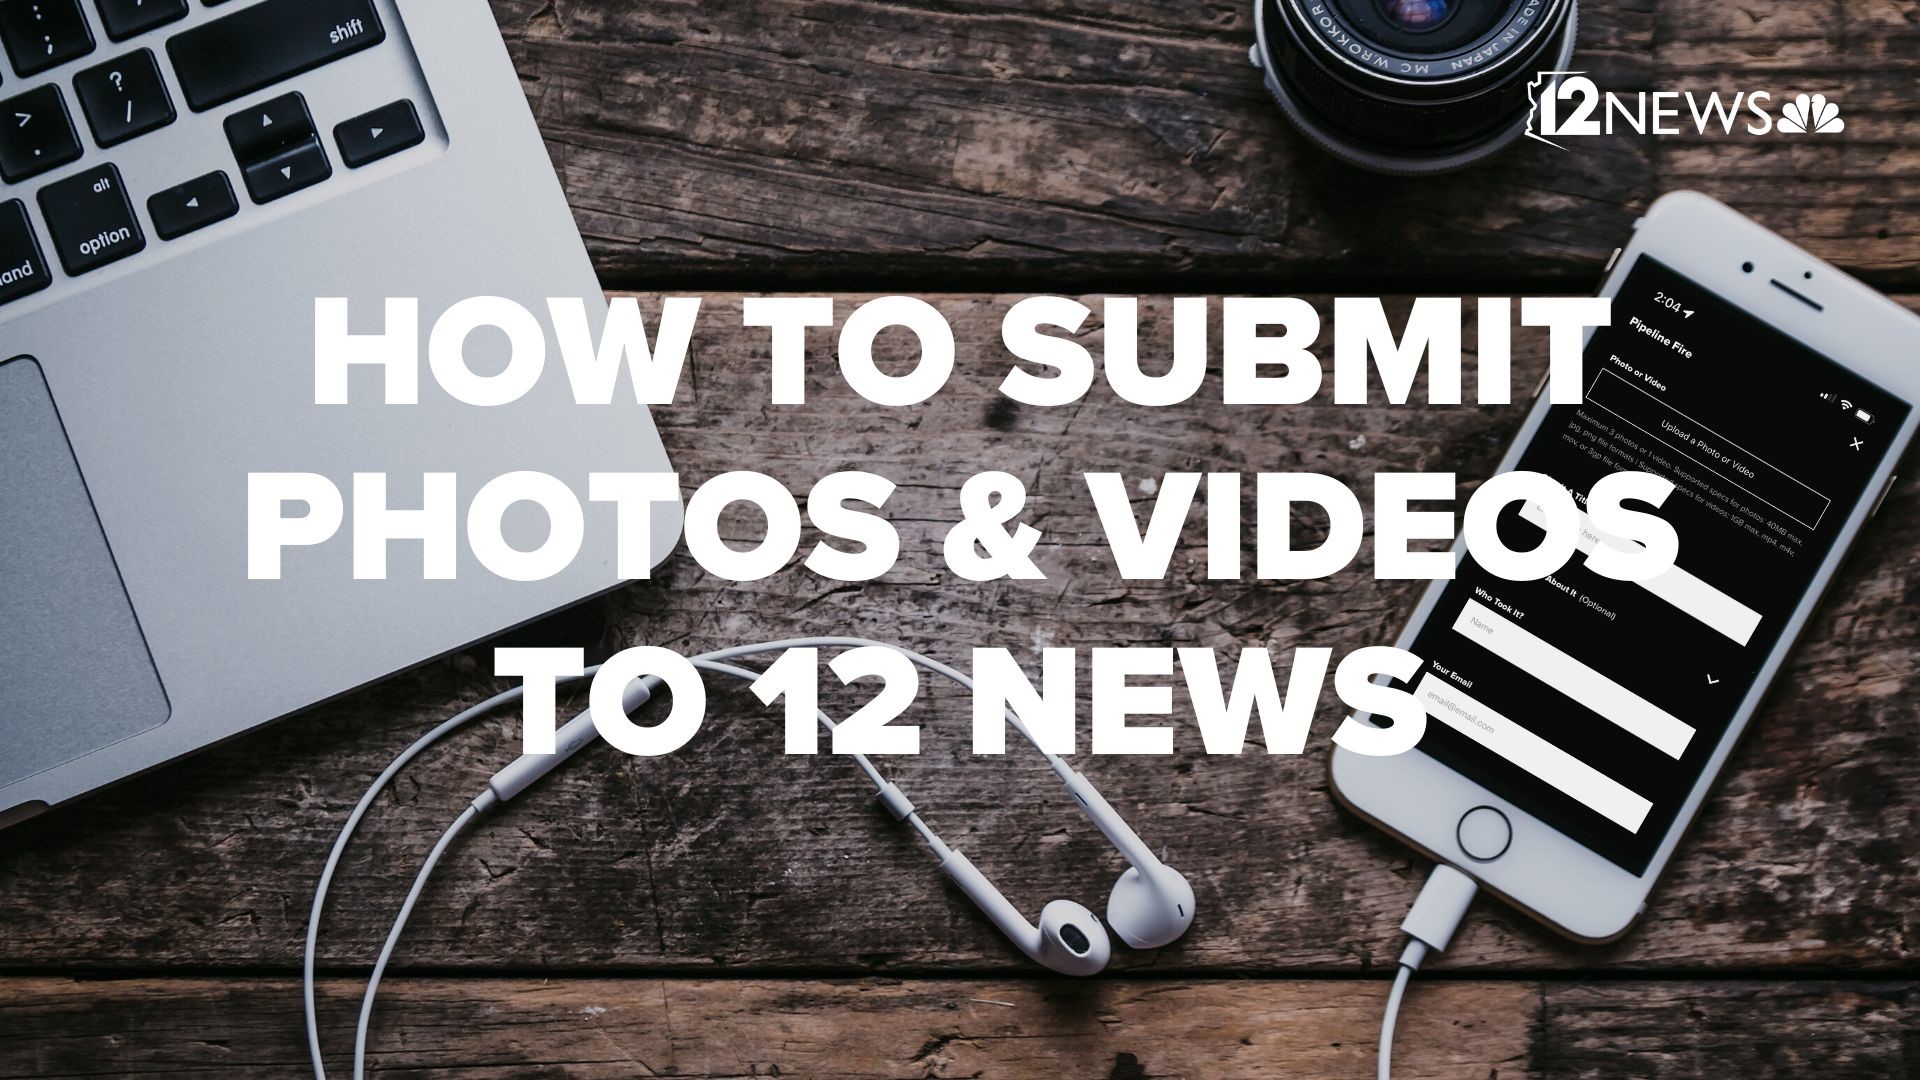 Here are some ways you can submit weather photos and videos to 12 News. They could be featured on a future broadcast!